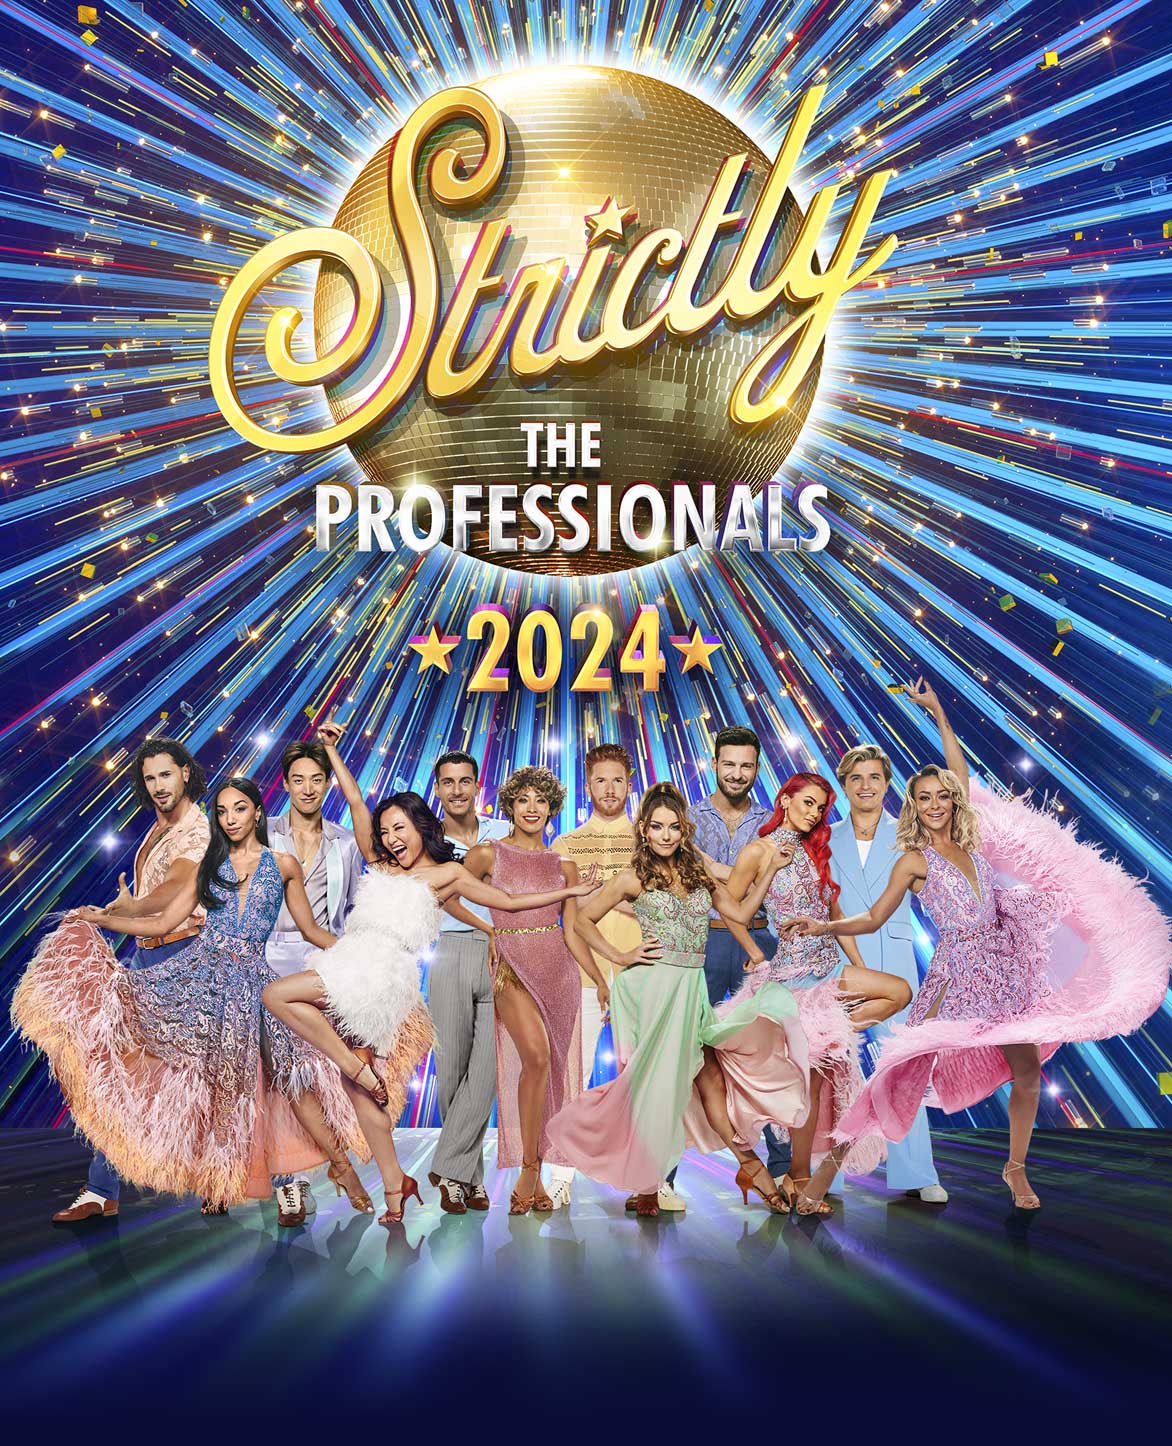 strictly professionals tour 2023 york